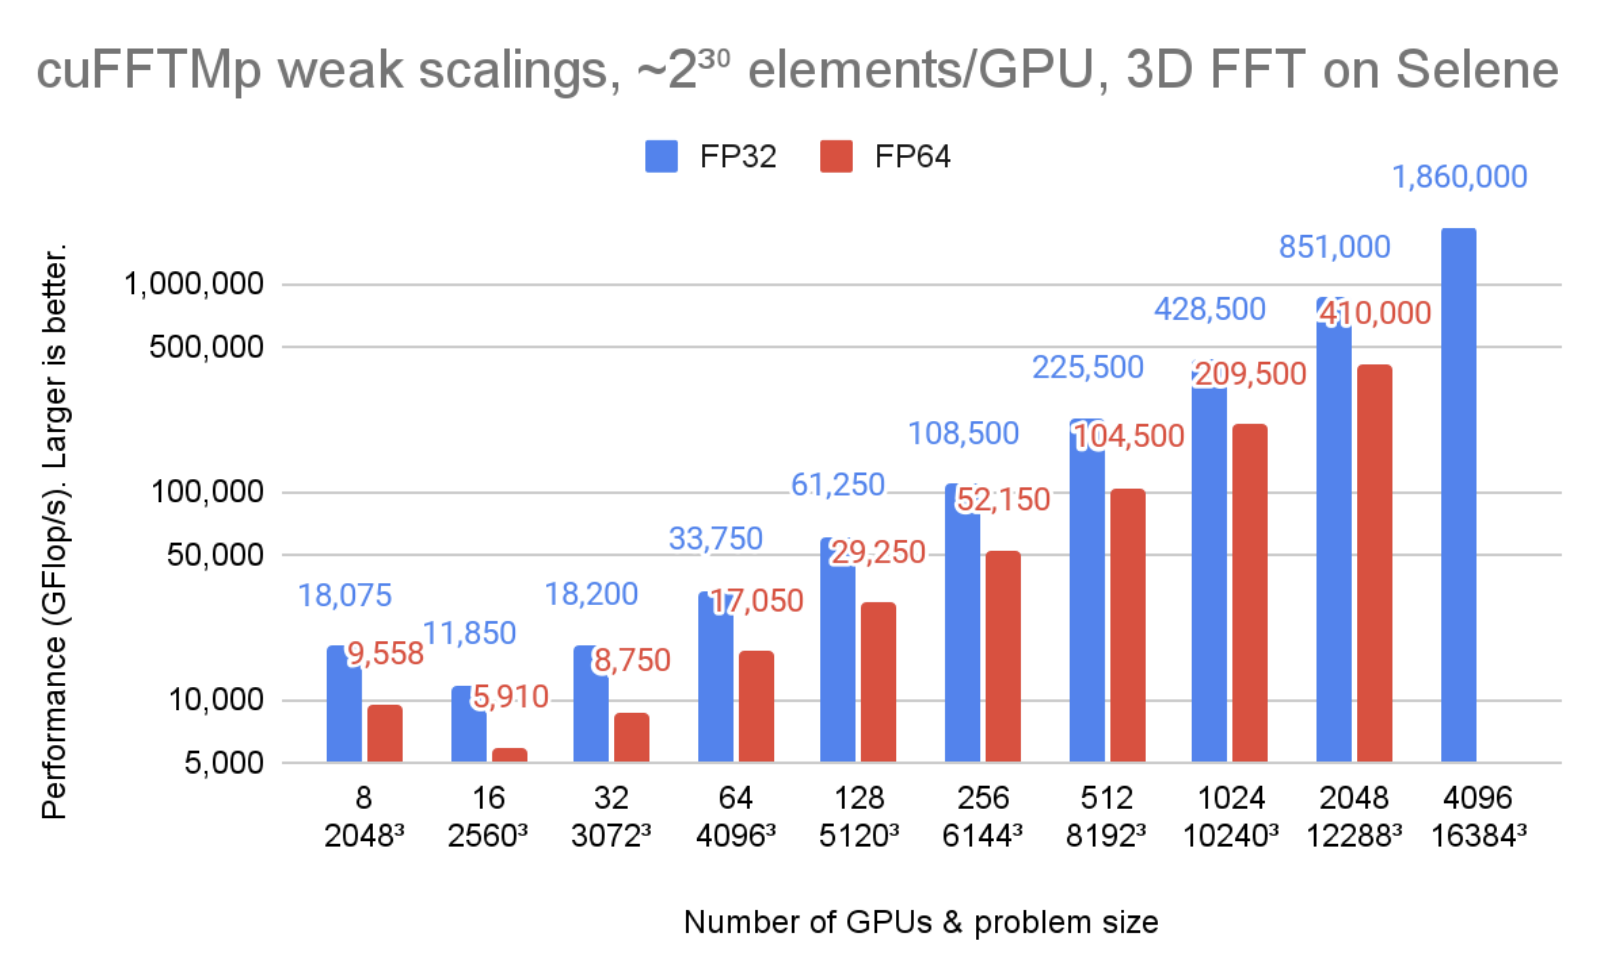 Bar chart shows cuFFTMp reaching over 1.8 PFlop/s, transforming 16,3843 (~over 4 trillion) complex data points using 4096 A100 80GB GPUs on the Selene cluster.